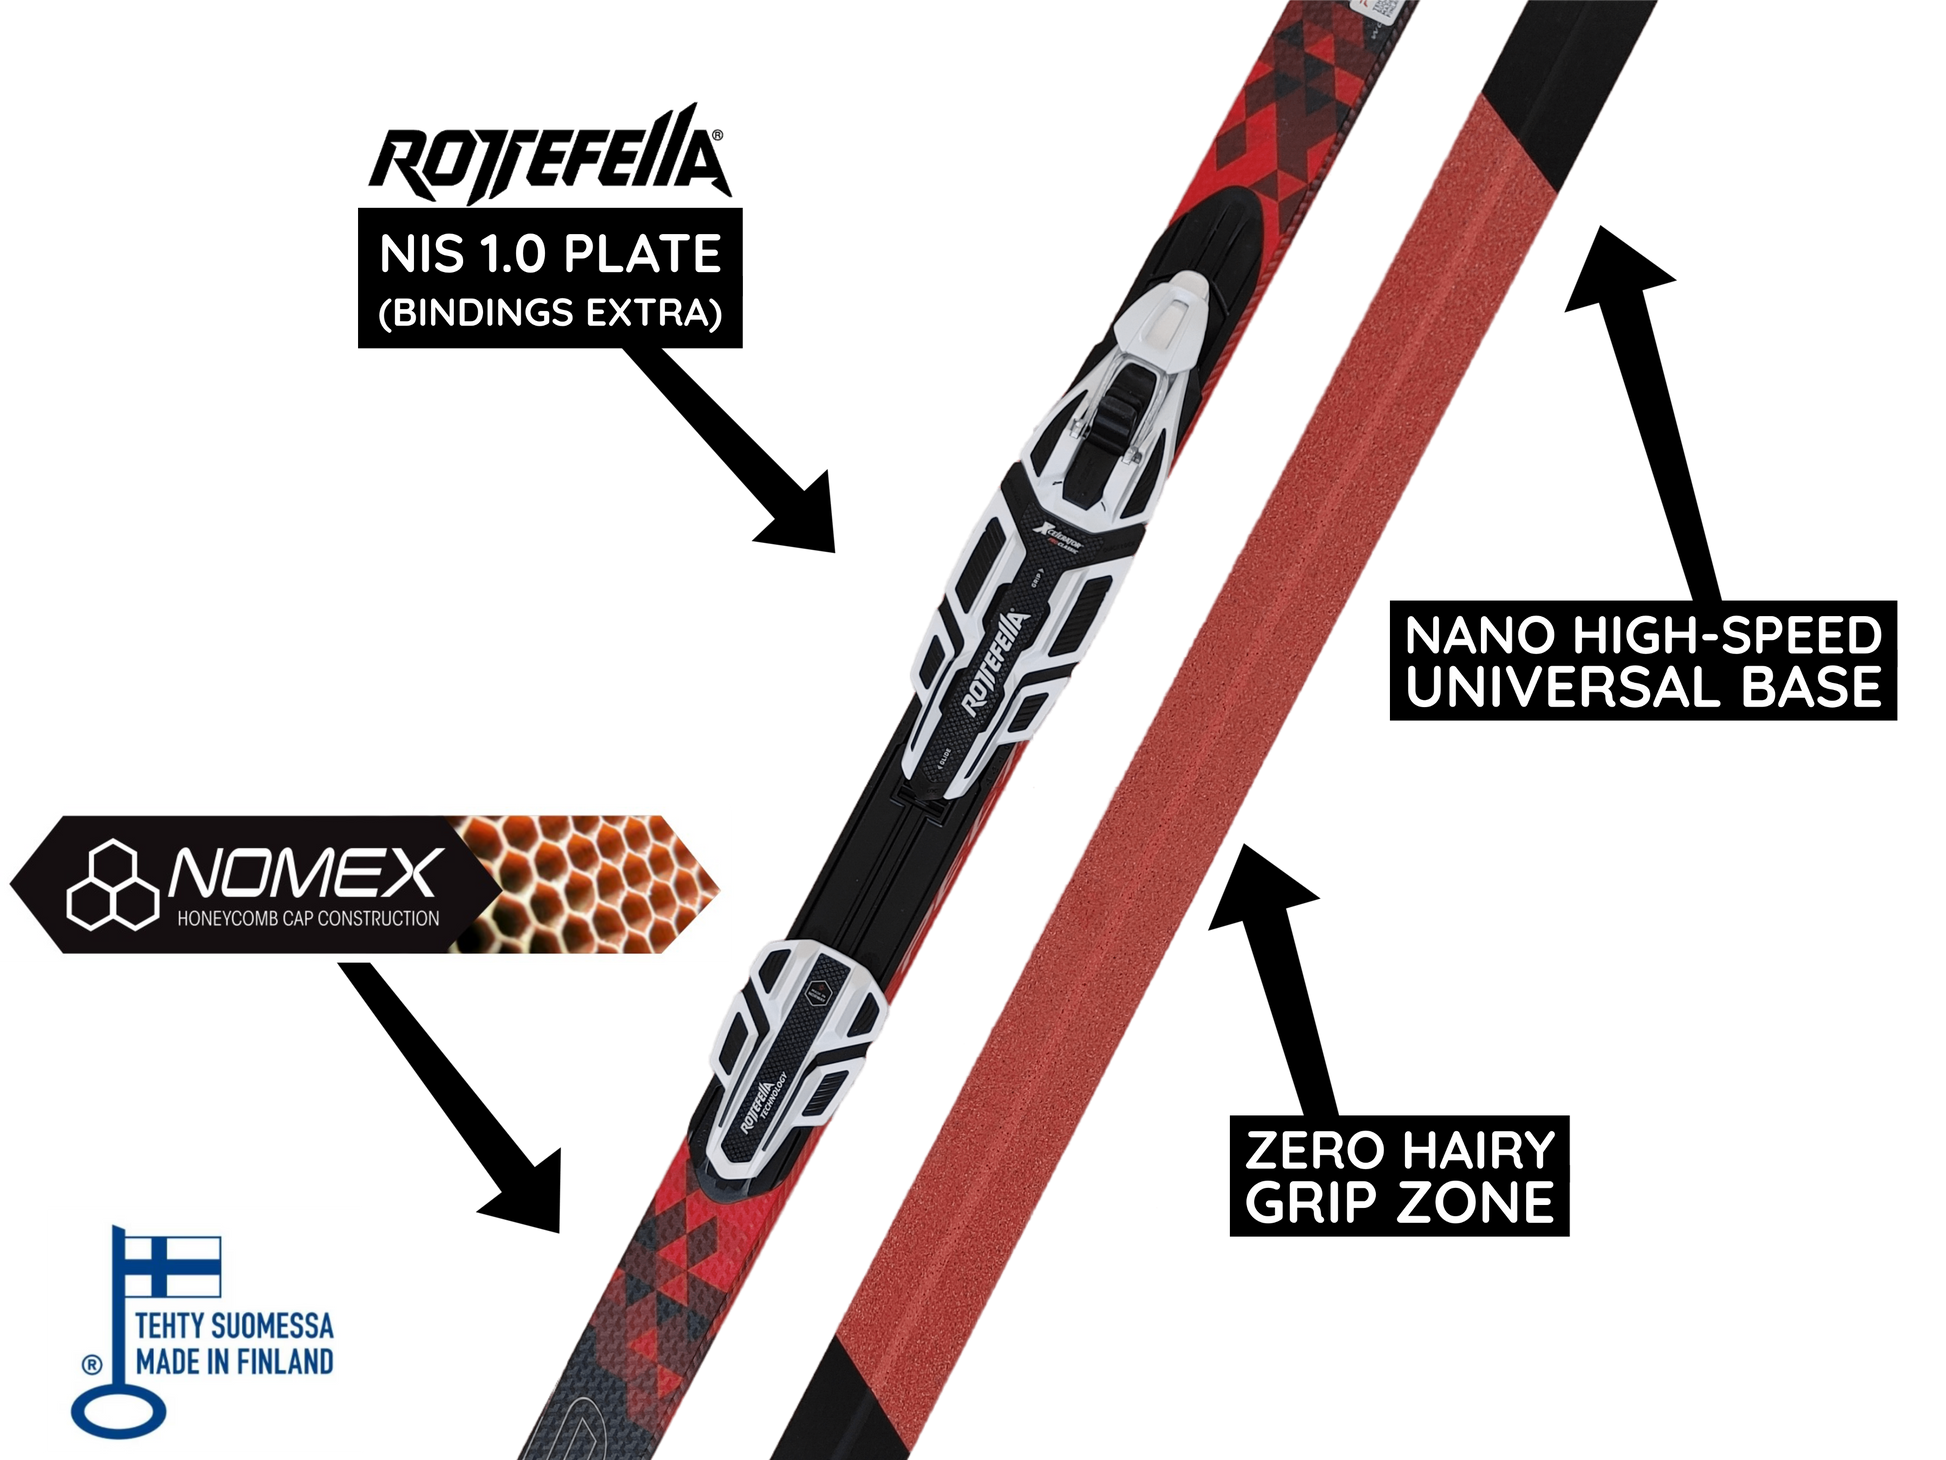 A product picture of the Peltonen INFRA X ZERO 2020 Classic Skis B-GRADE MINOR DEFECTS